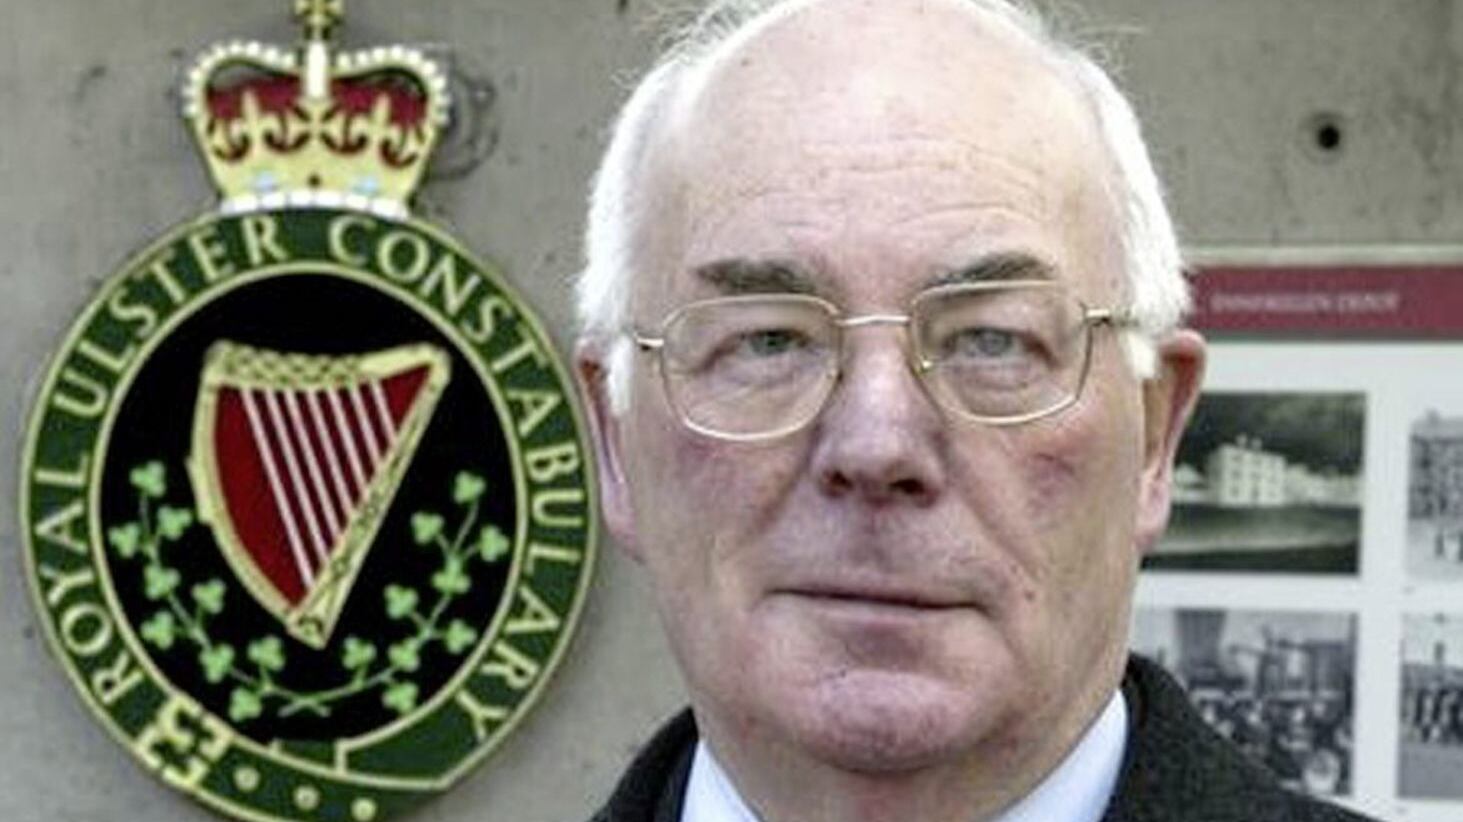 The funeral of west Belfast man, James McDonald, who was the first chairman of the Royal Ulster Constabulary George Cross Foundation, will take place on Saturday 